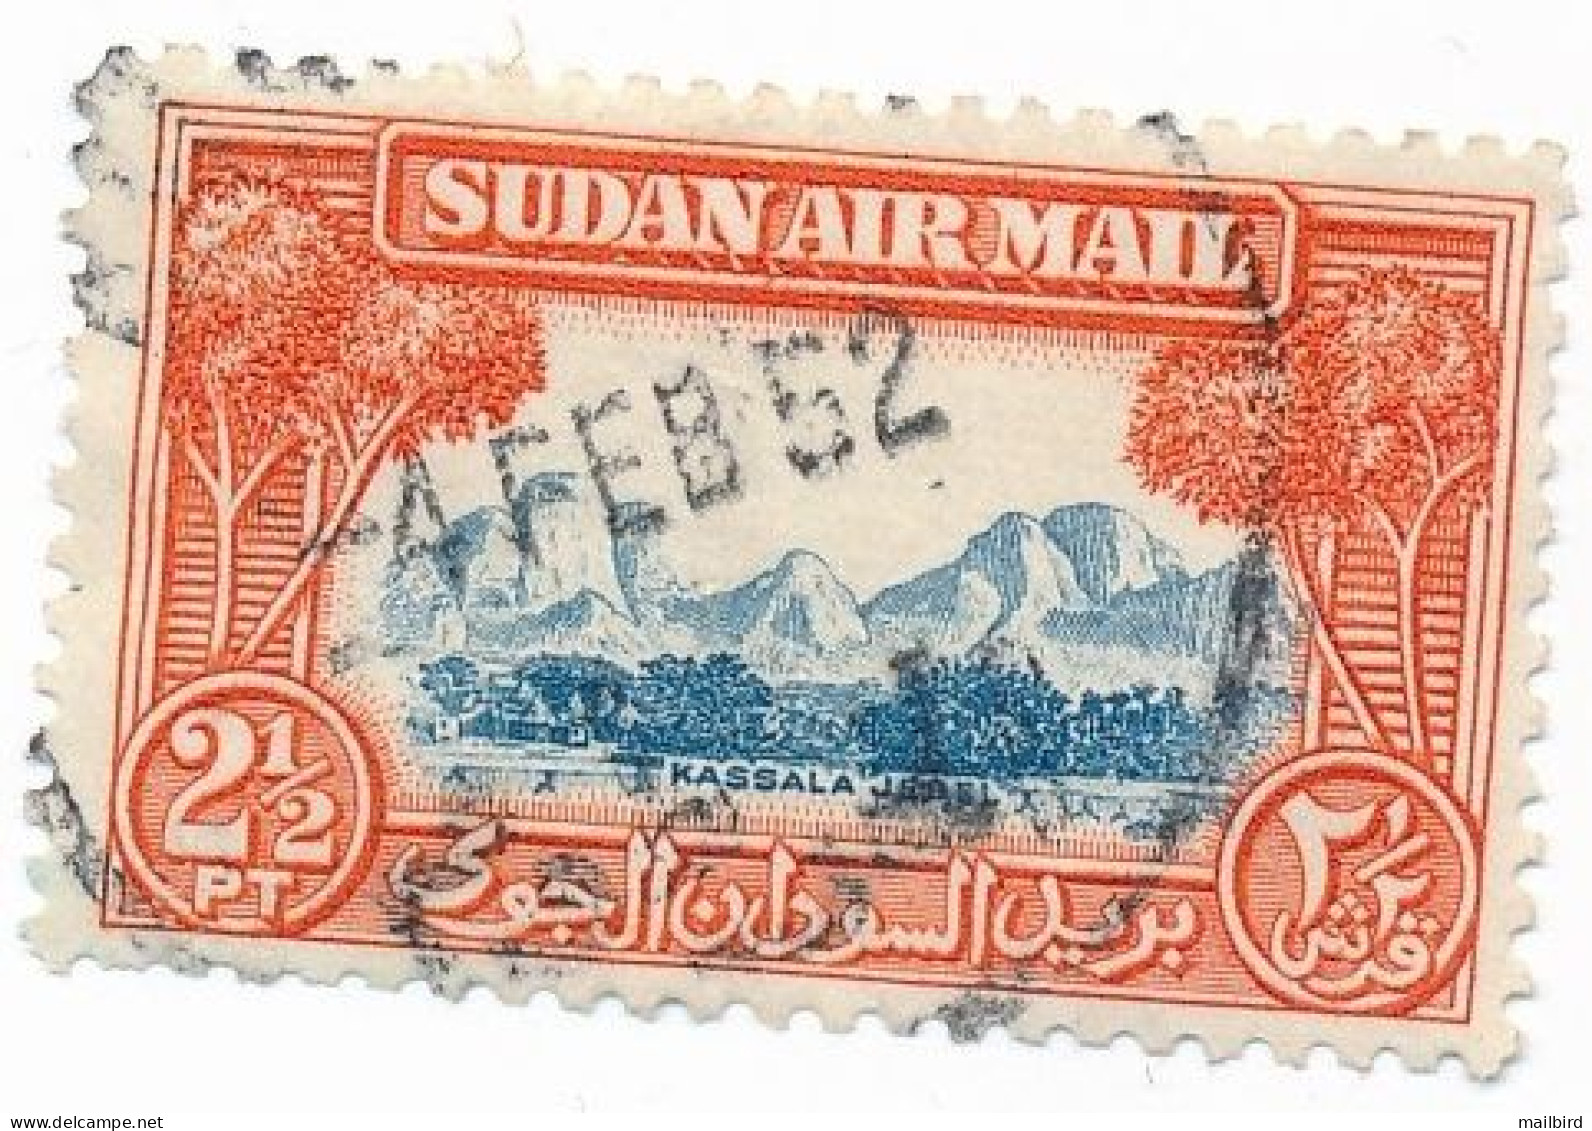 Sudan 1950 Airmail - Local Motives 2½ Pia. Rare & Collectible Stamp - USED & Stamped 4 FEB 1952 - Soudan (1954-...)